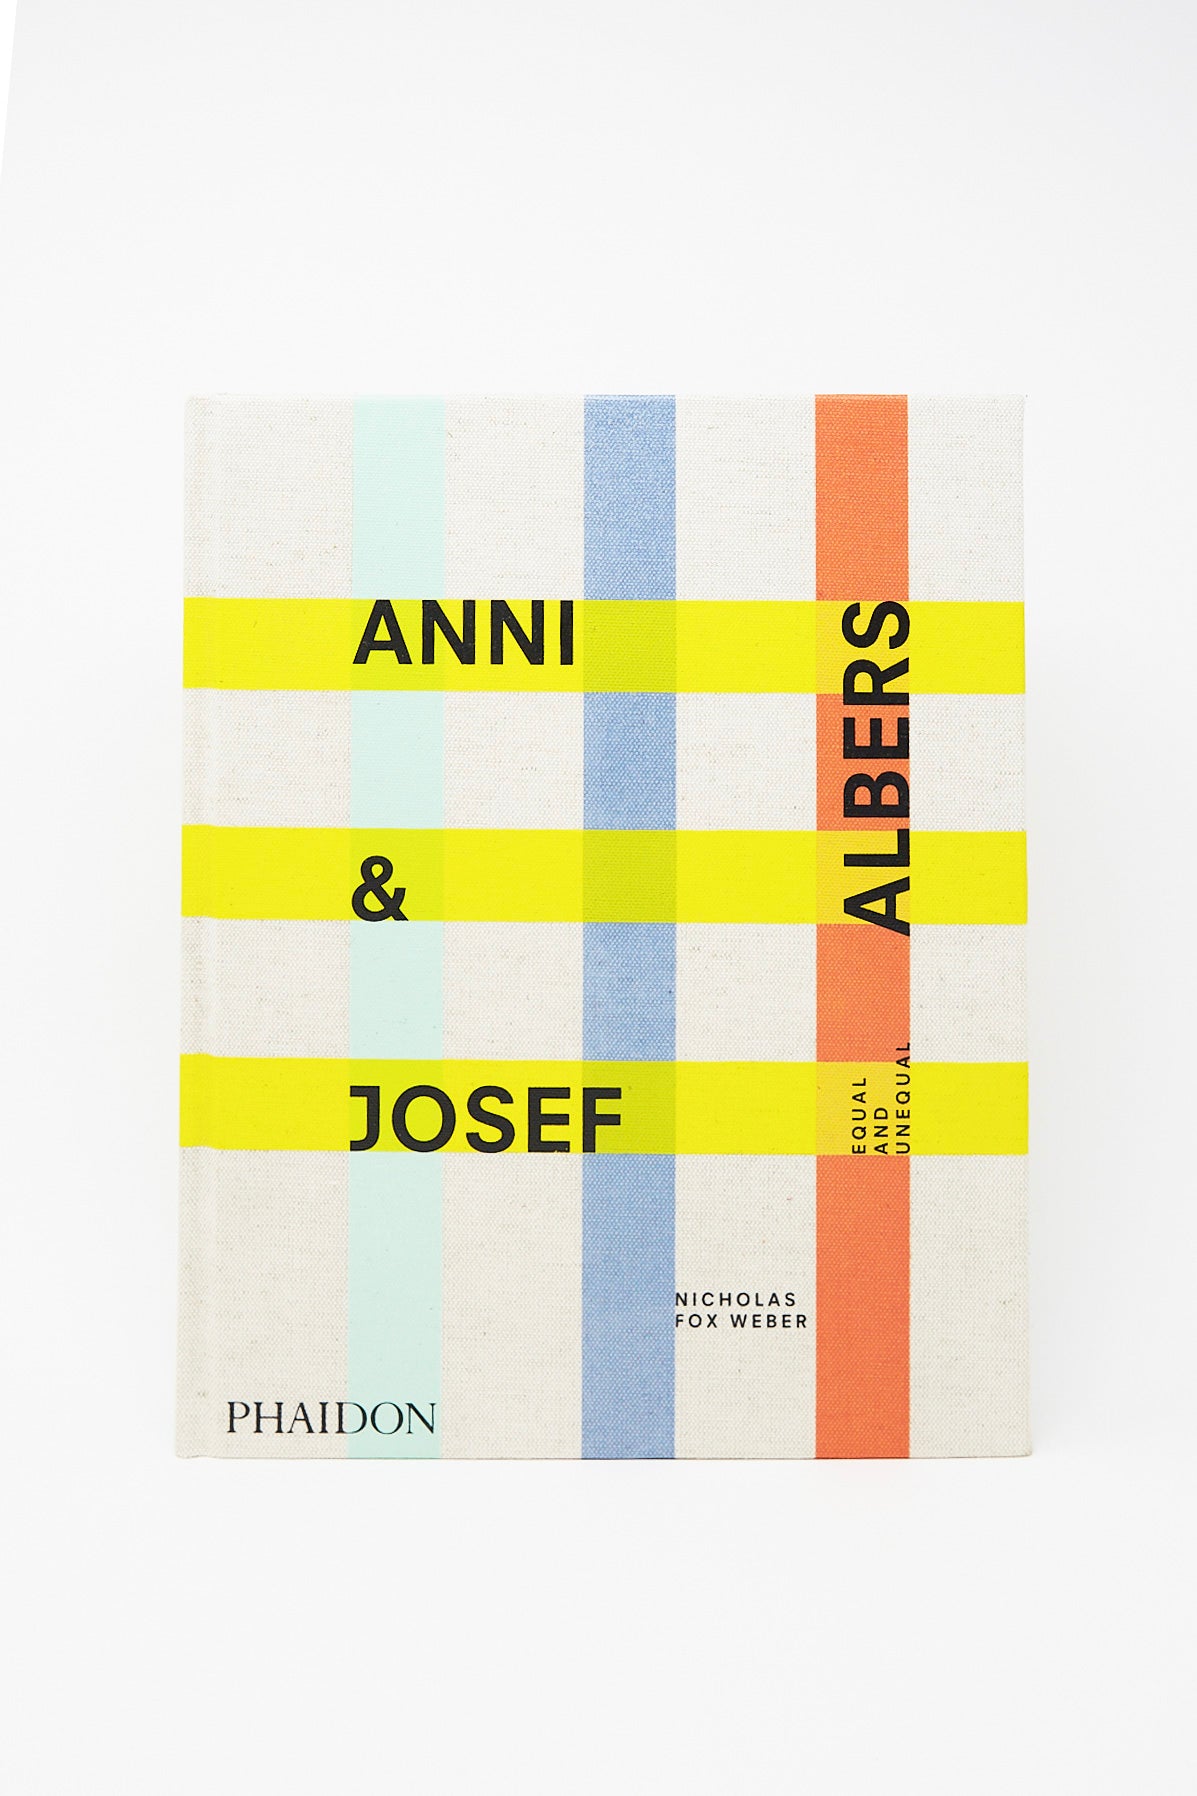 A book cover with a minimalist striped design featuring the title "Anni & Josef Albers: Equal and Unequal," both renowned textile artists, and the publisher "Phaidon" with the author's name, "n".